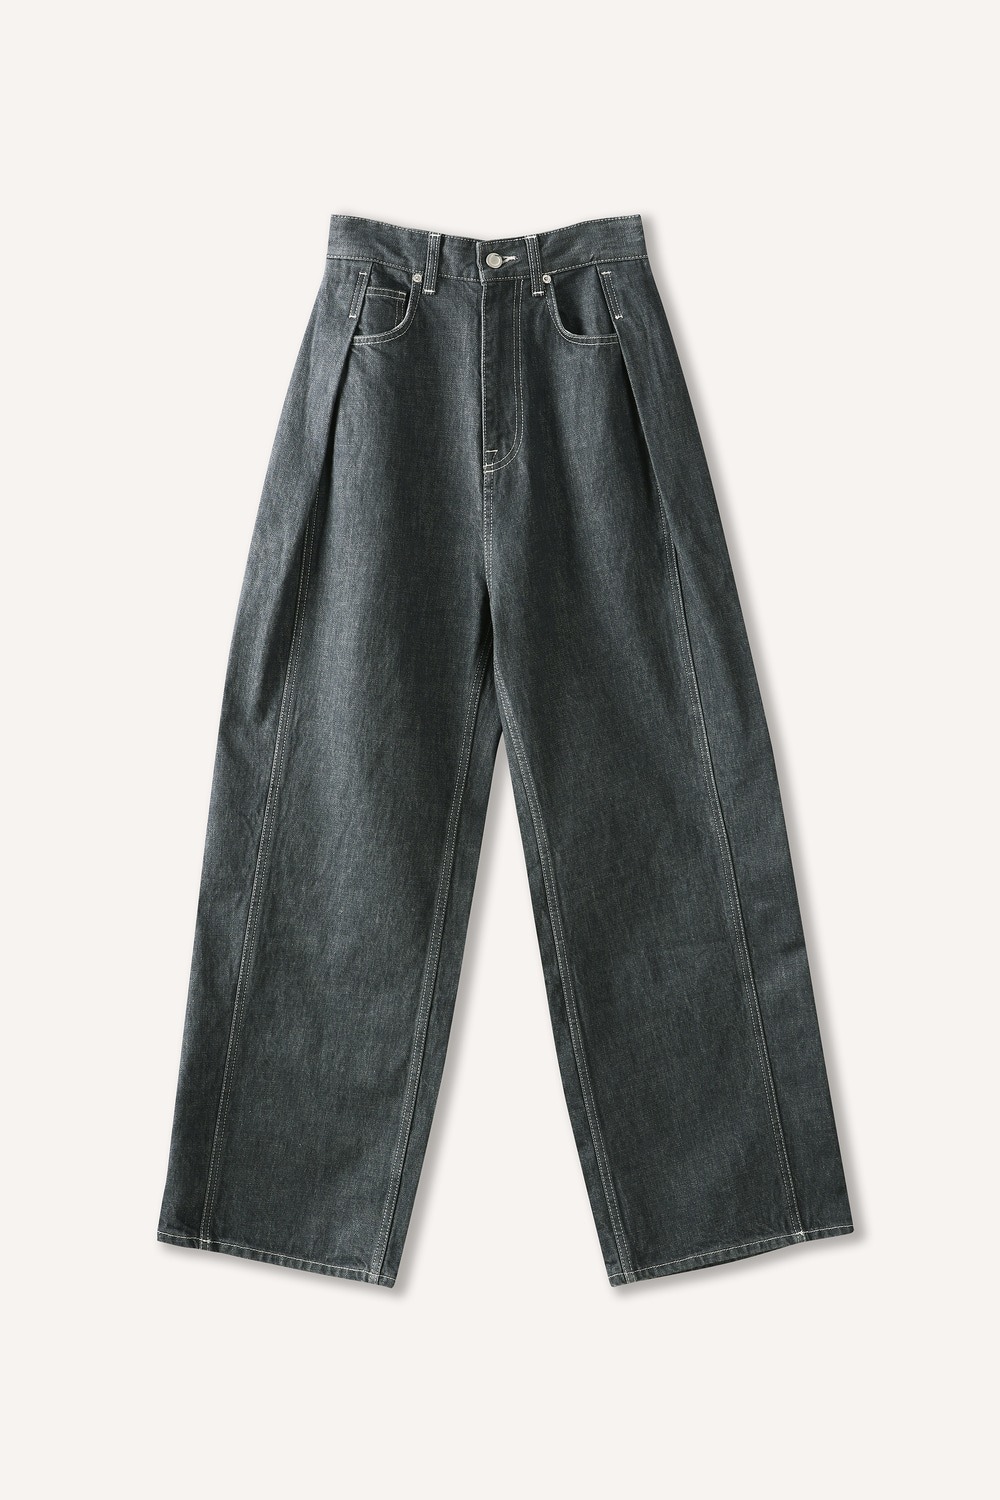 [Steady Bourie] Side Panel Denim Pants_GY